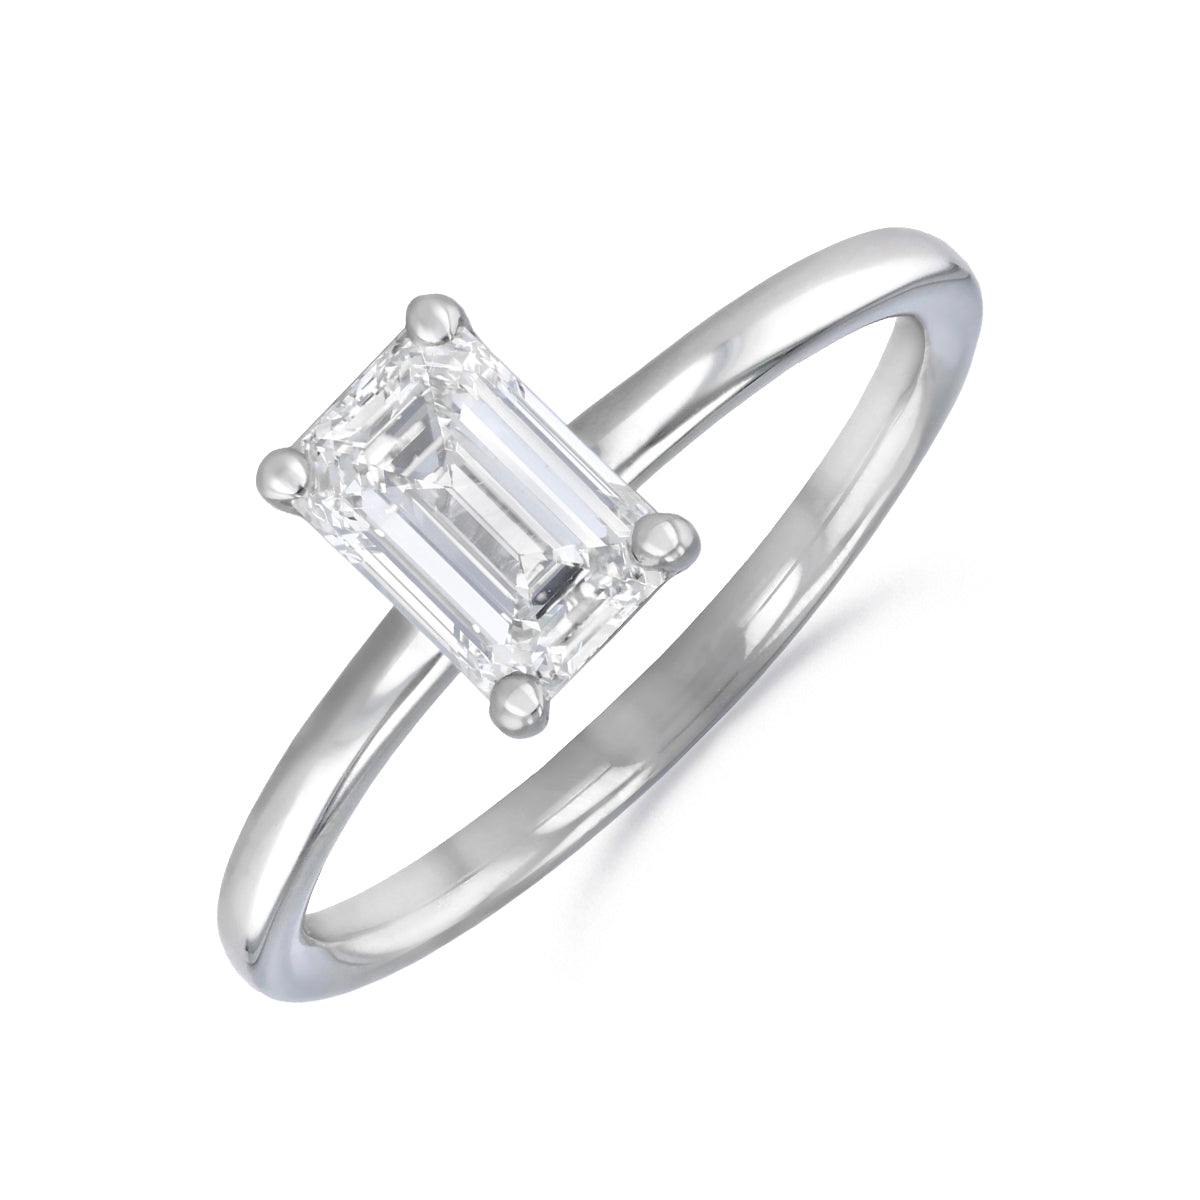 0-35ct-sofia-emerald-cut-solitaire-diamond-engagement-ring-18ct-white-gold